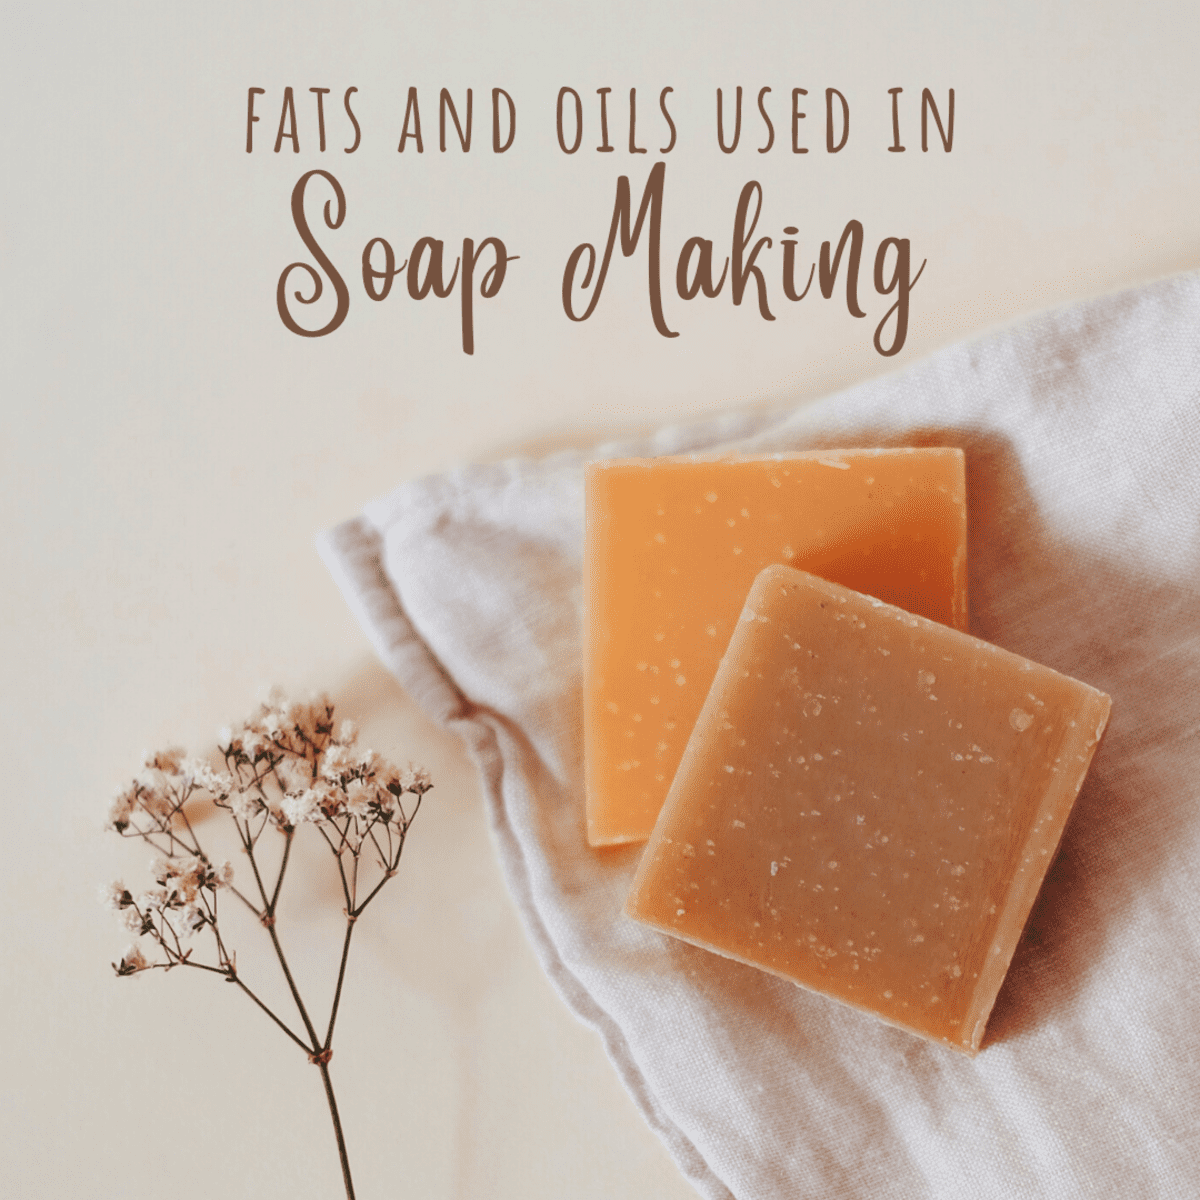 The Roles of Different Fats and Oils in Soap Making - FeltMagnet